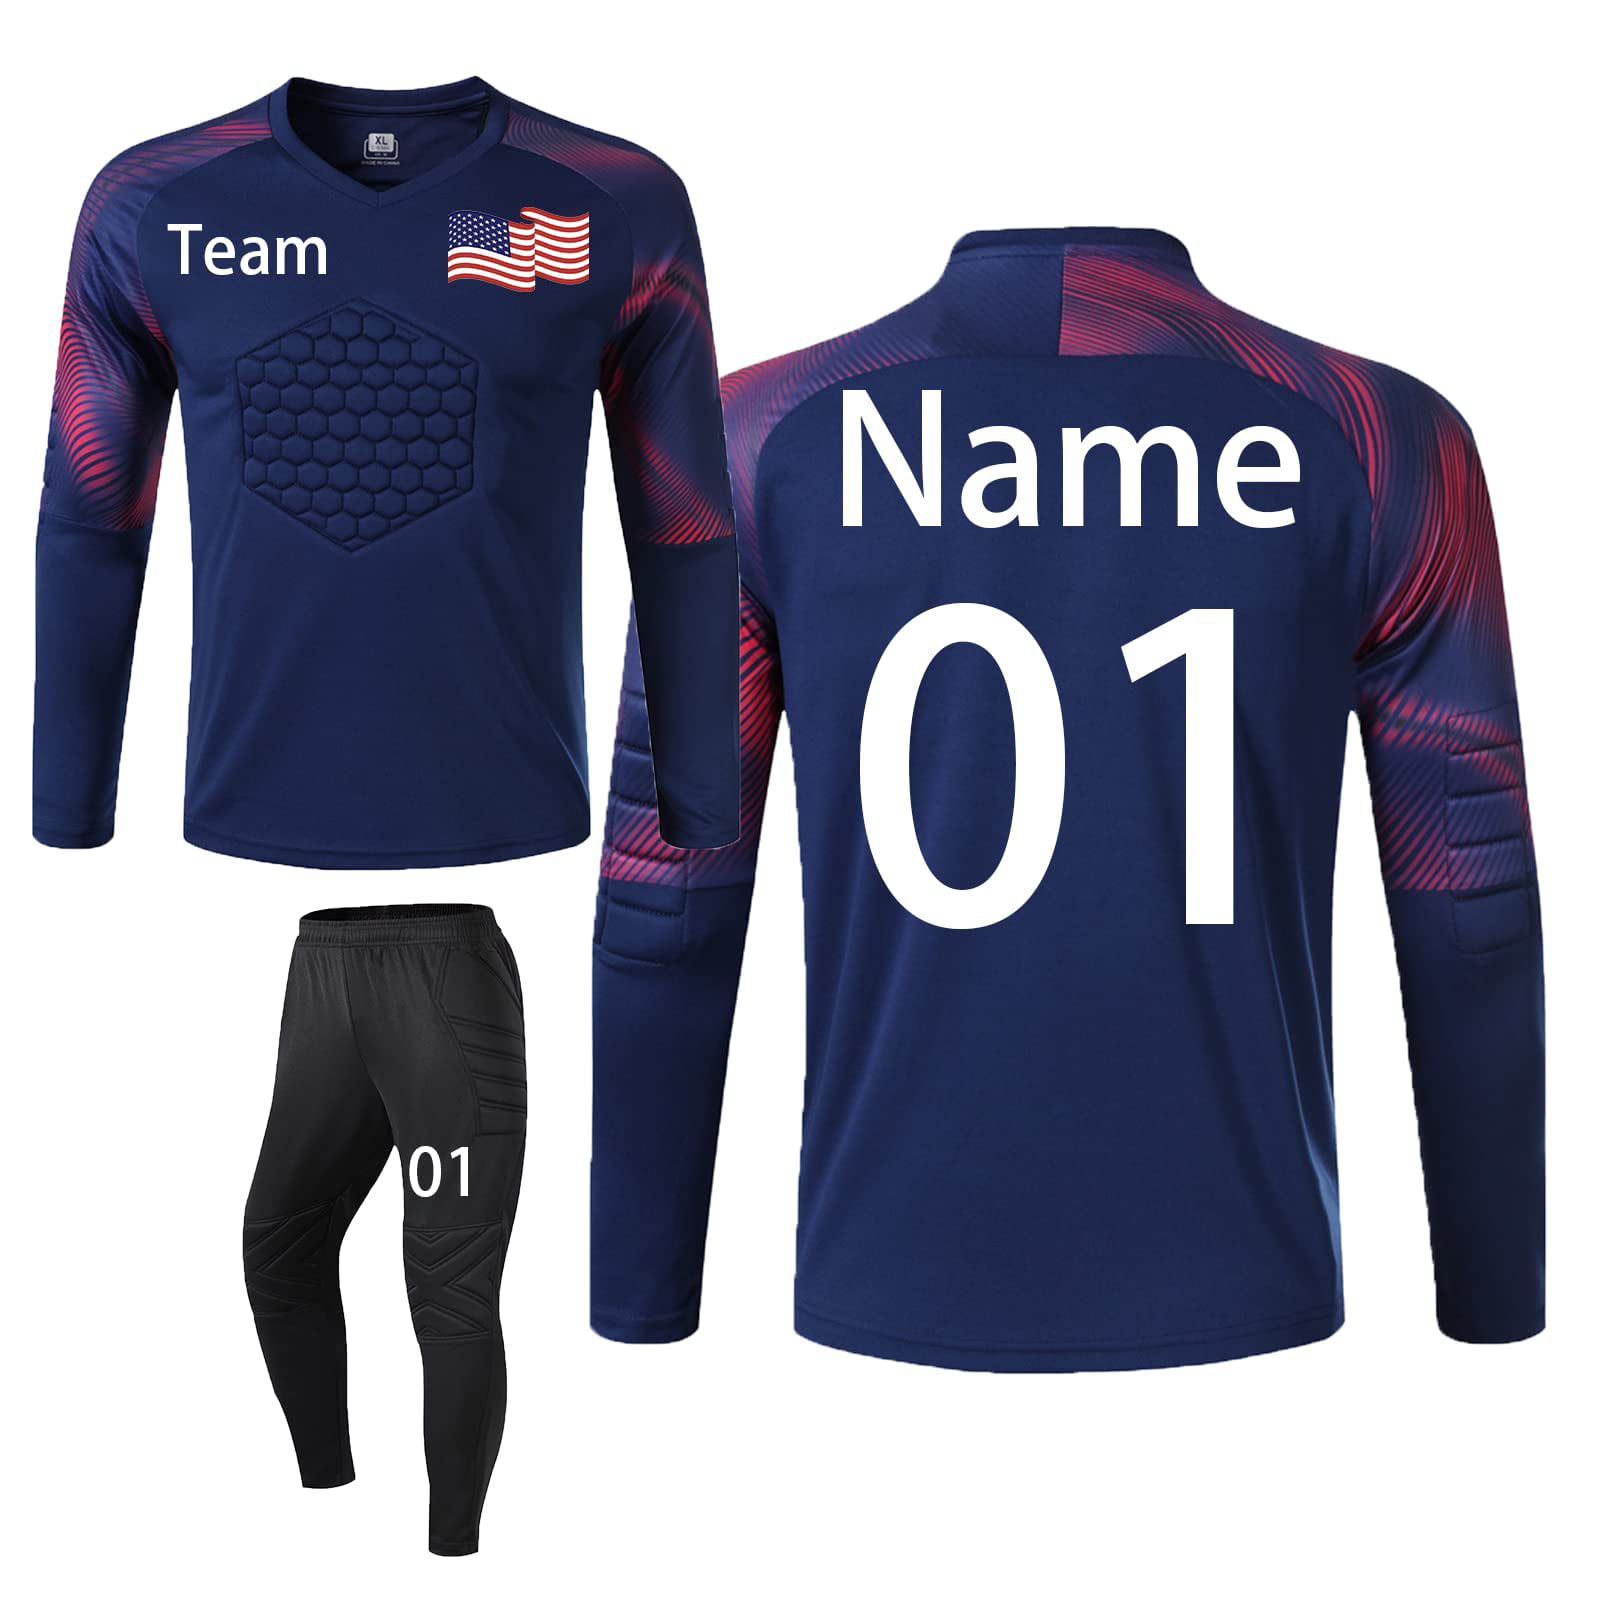 Laifu Personalized Goalie Jersey with Name Number Team Name Logo,Soccer Goalie Jersey for Men/Youth 